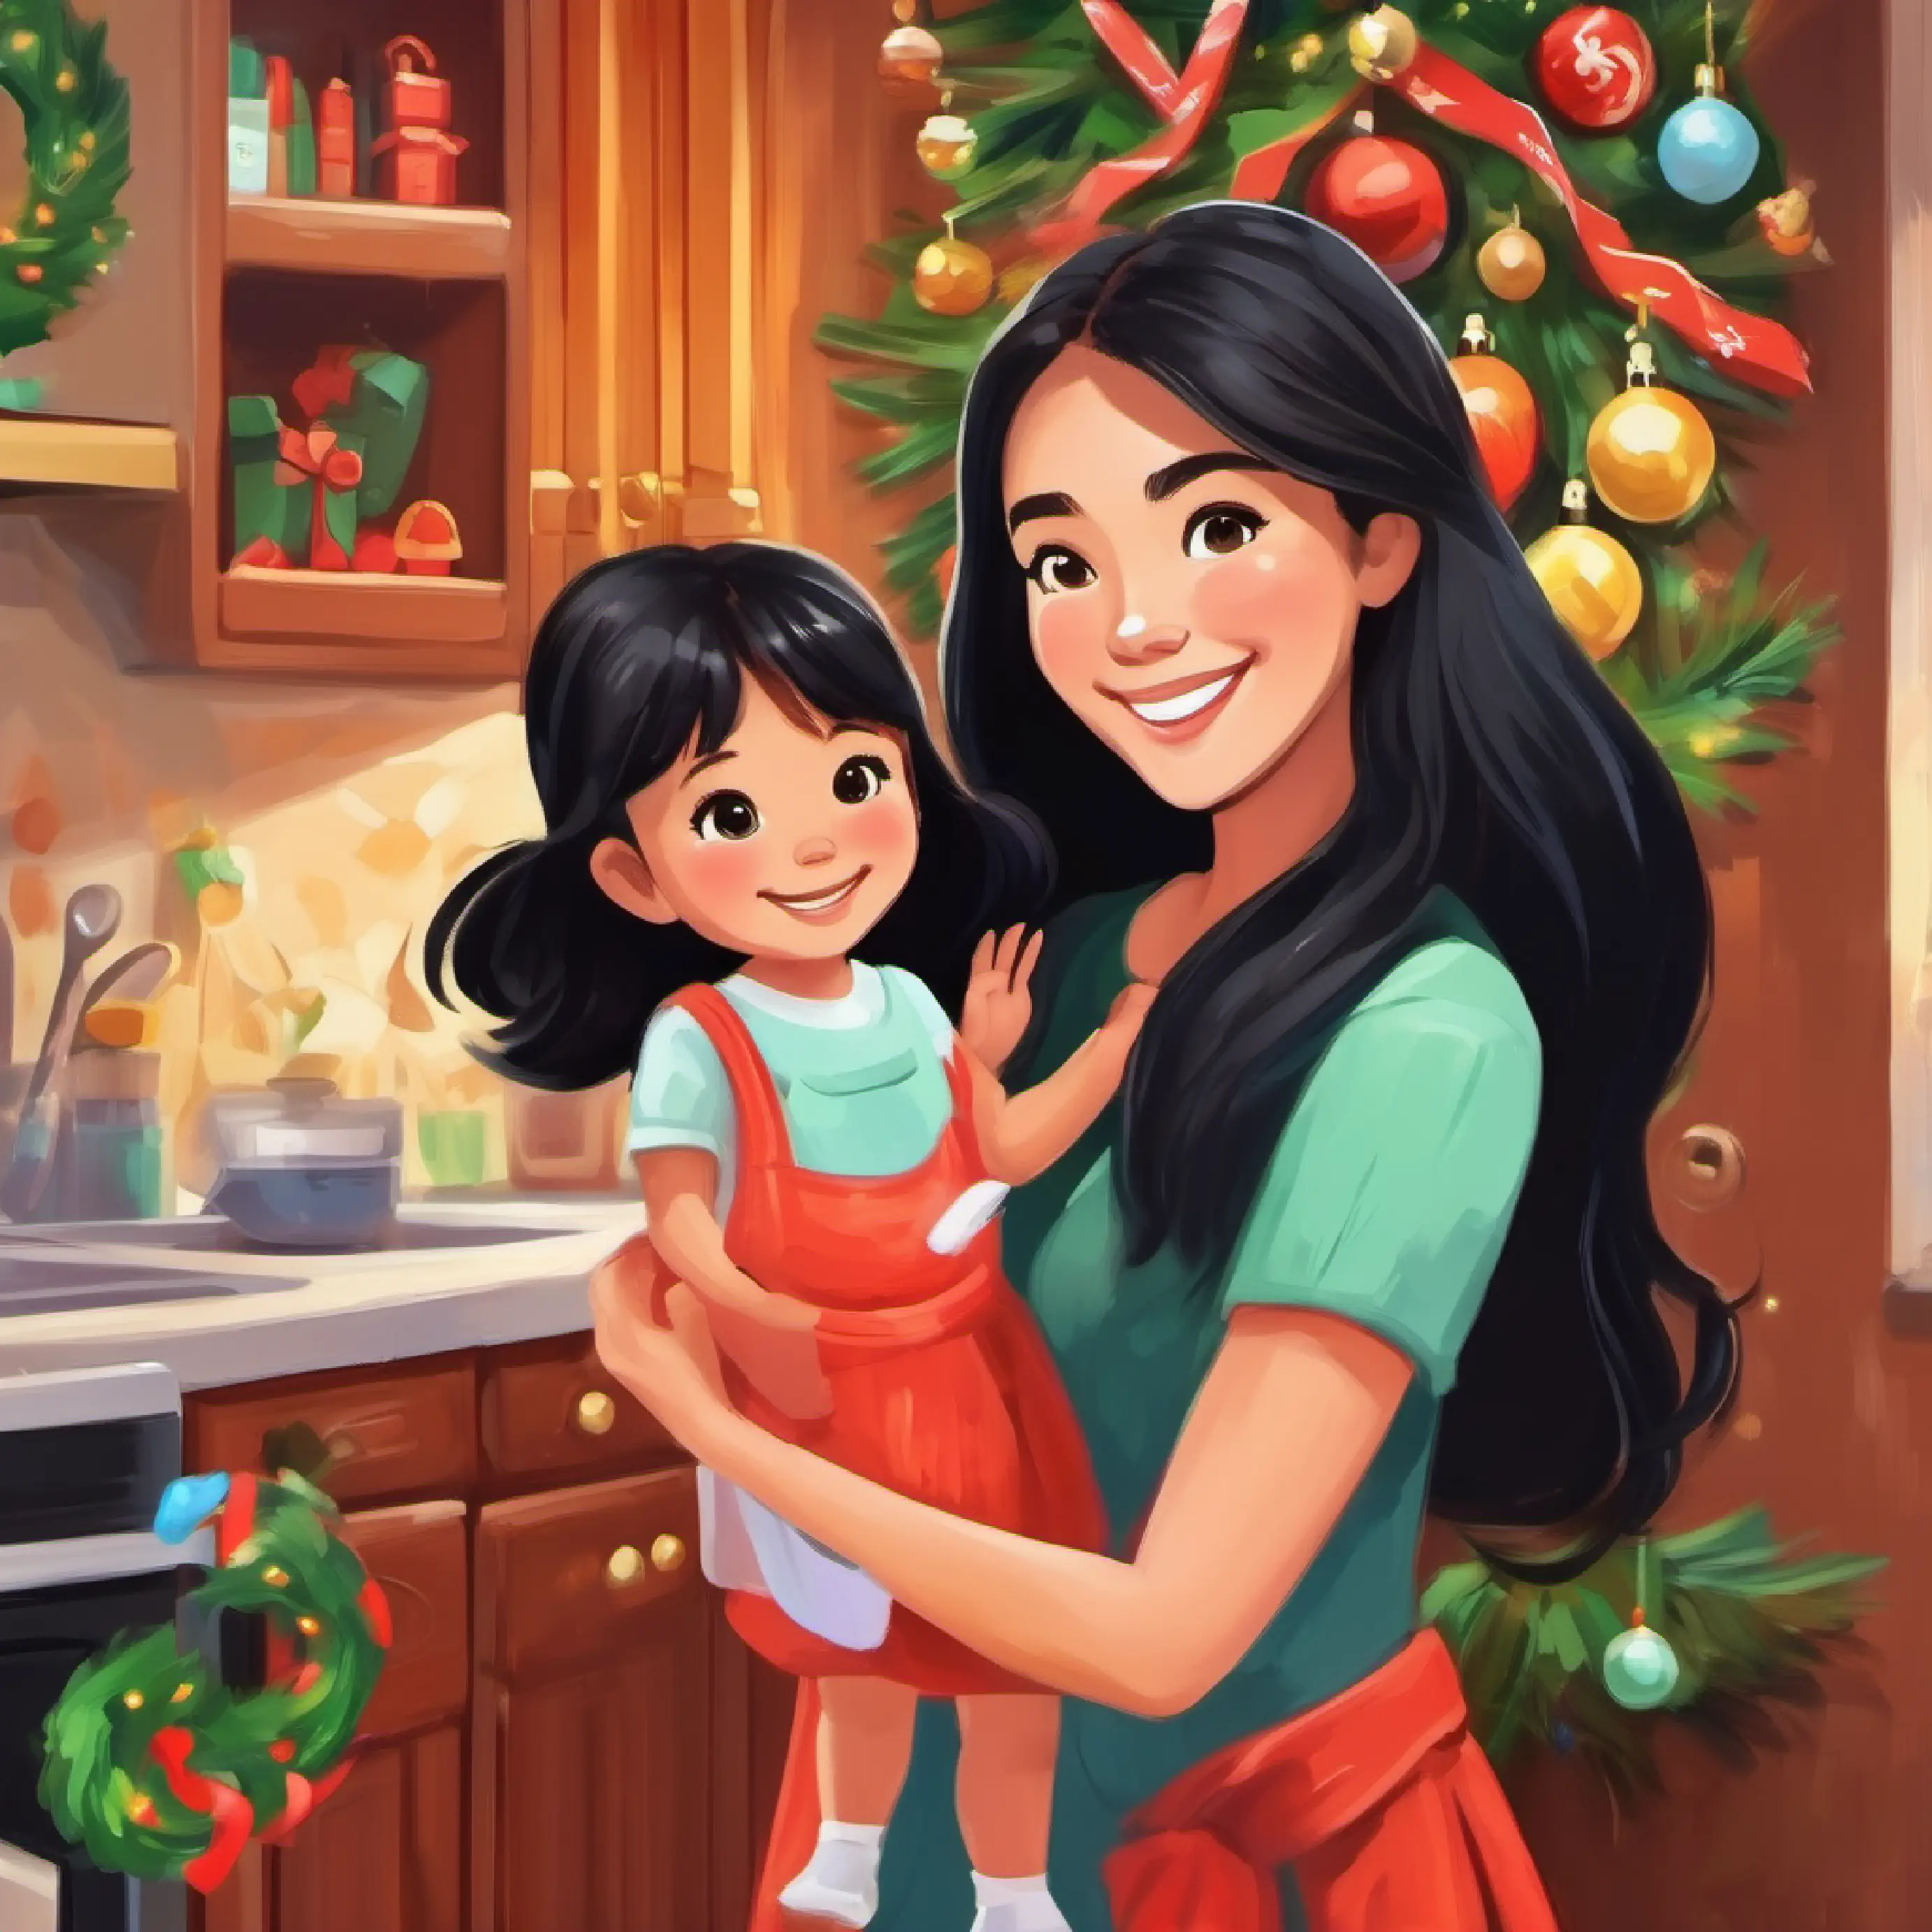 Young girl, long black hair, brown eyes, vibrant smile helps mom clean for a fresh start.